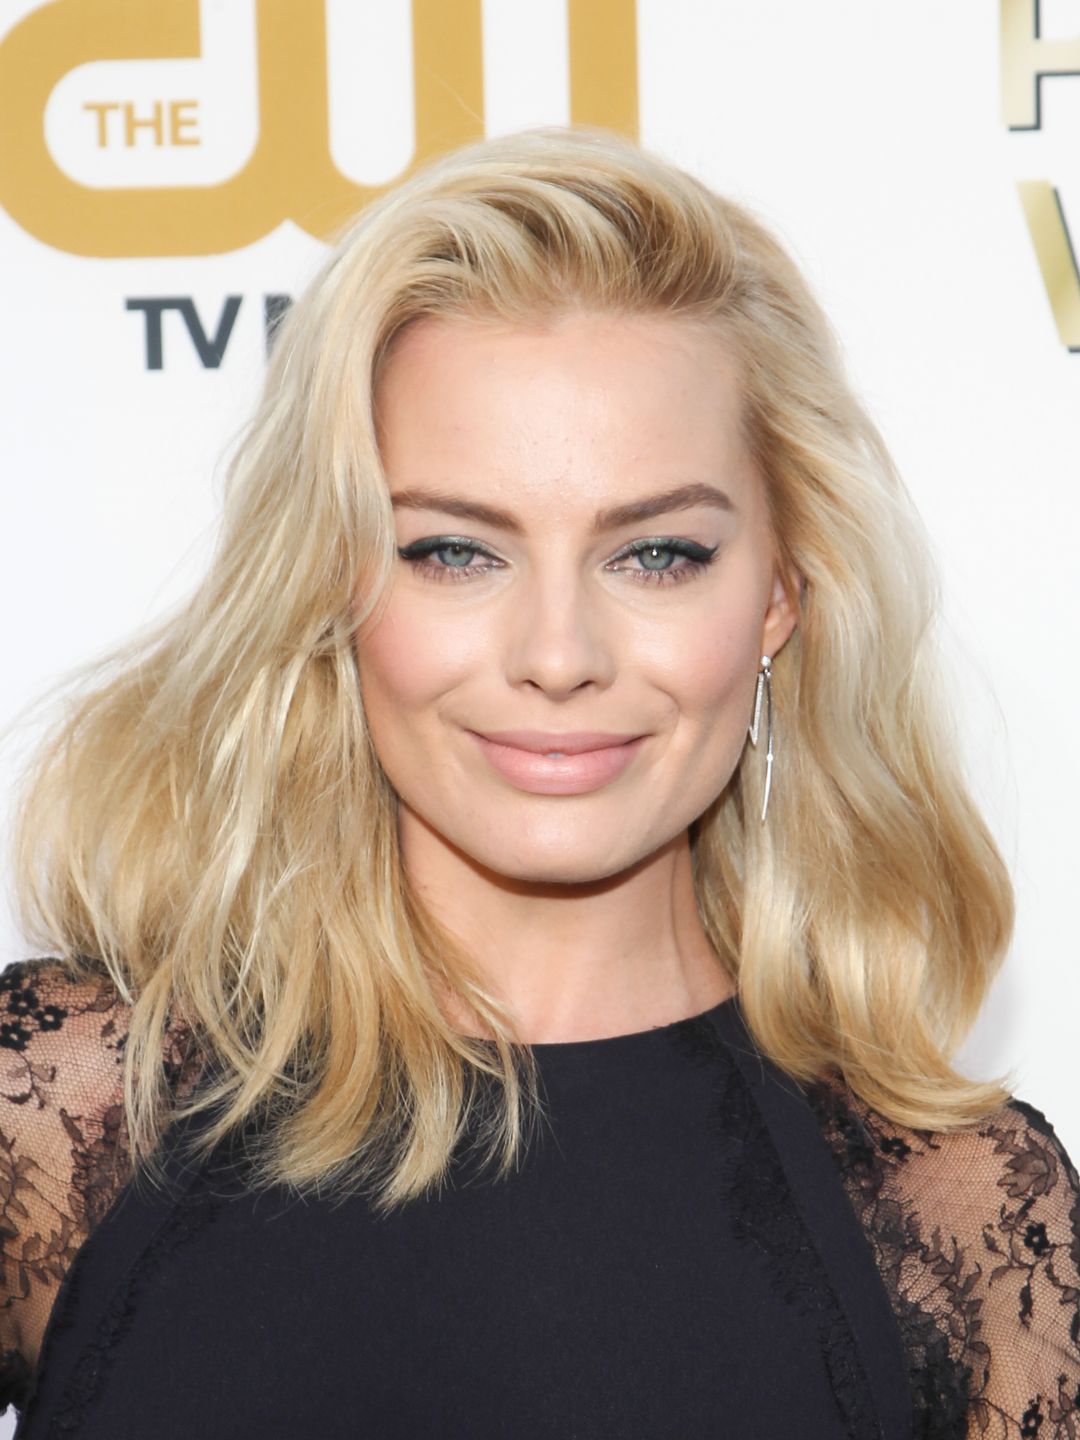 Margot Robbie who is her mother